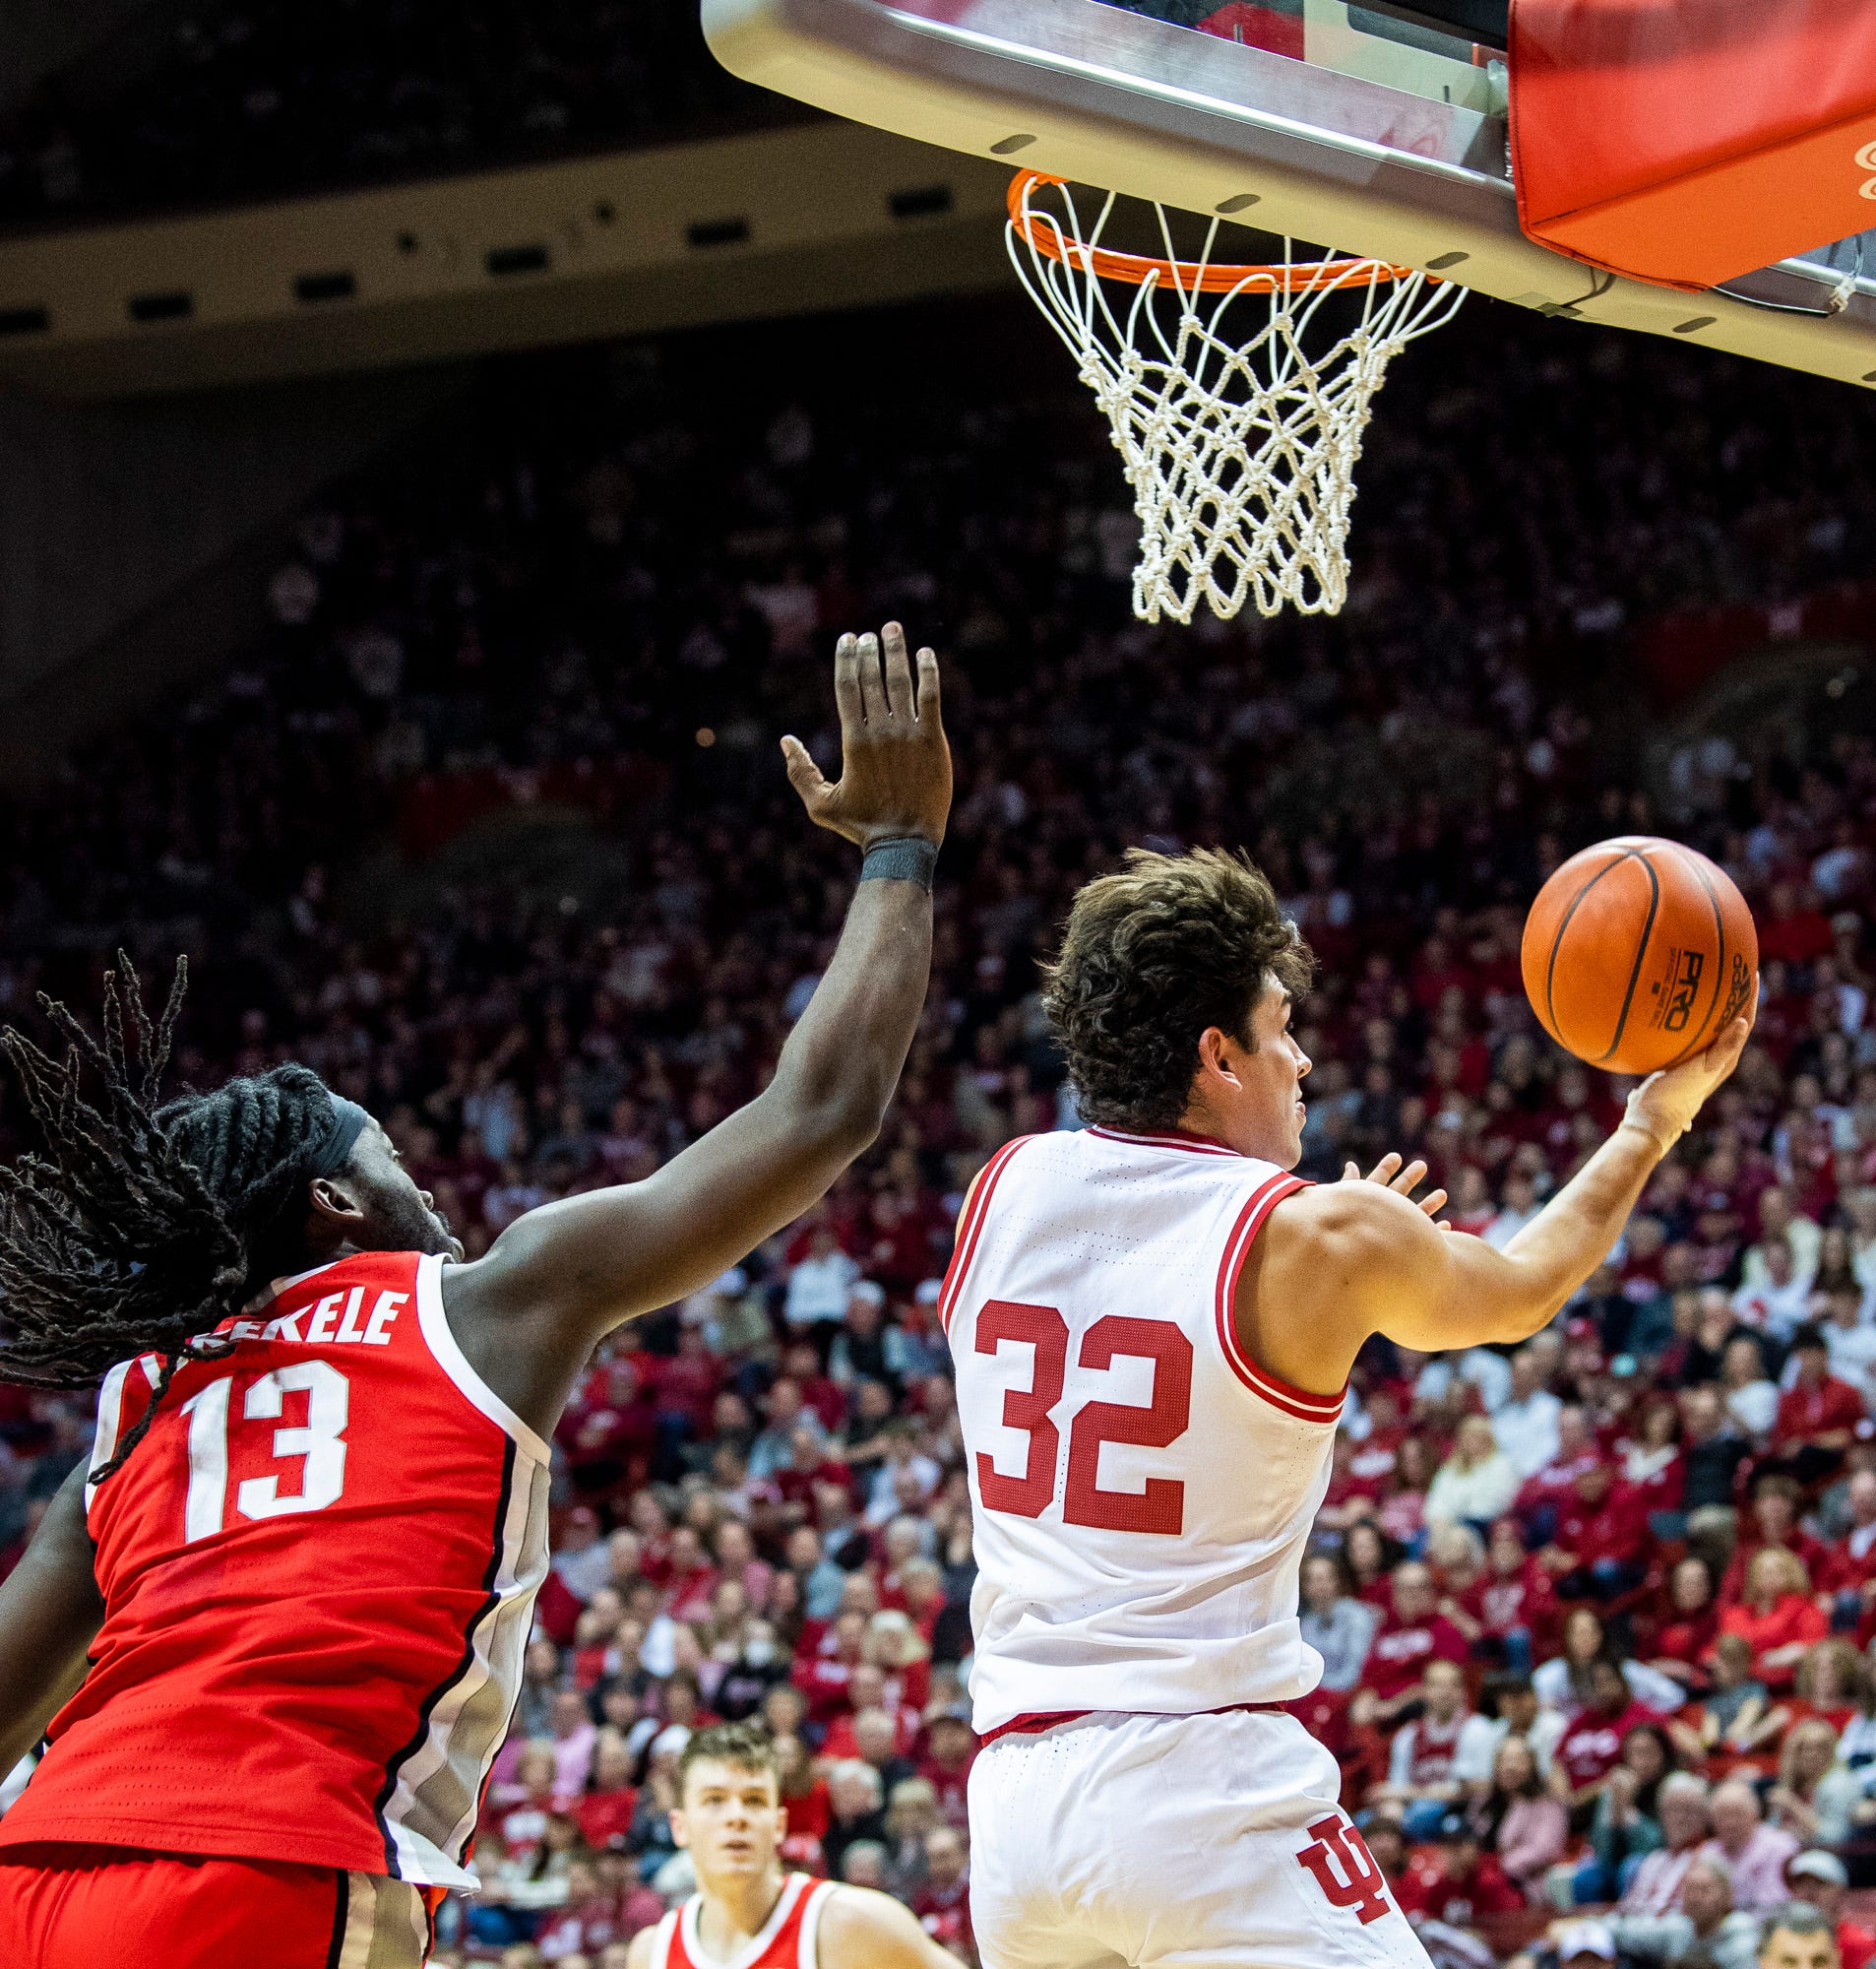 IU vs. Ohio State: 'It felt like the better team showed up, showed it and won the game.'